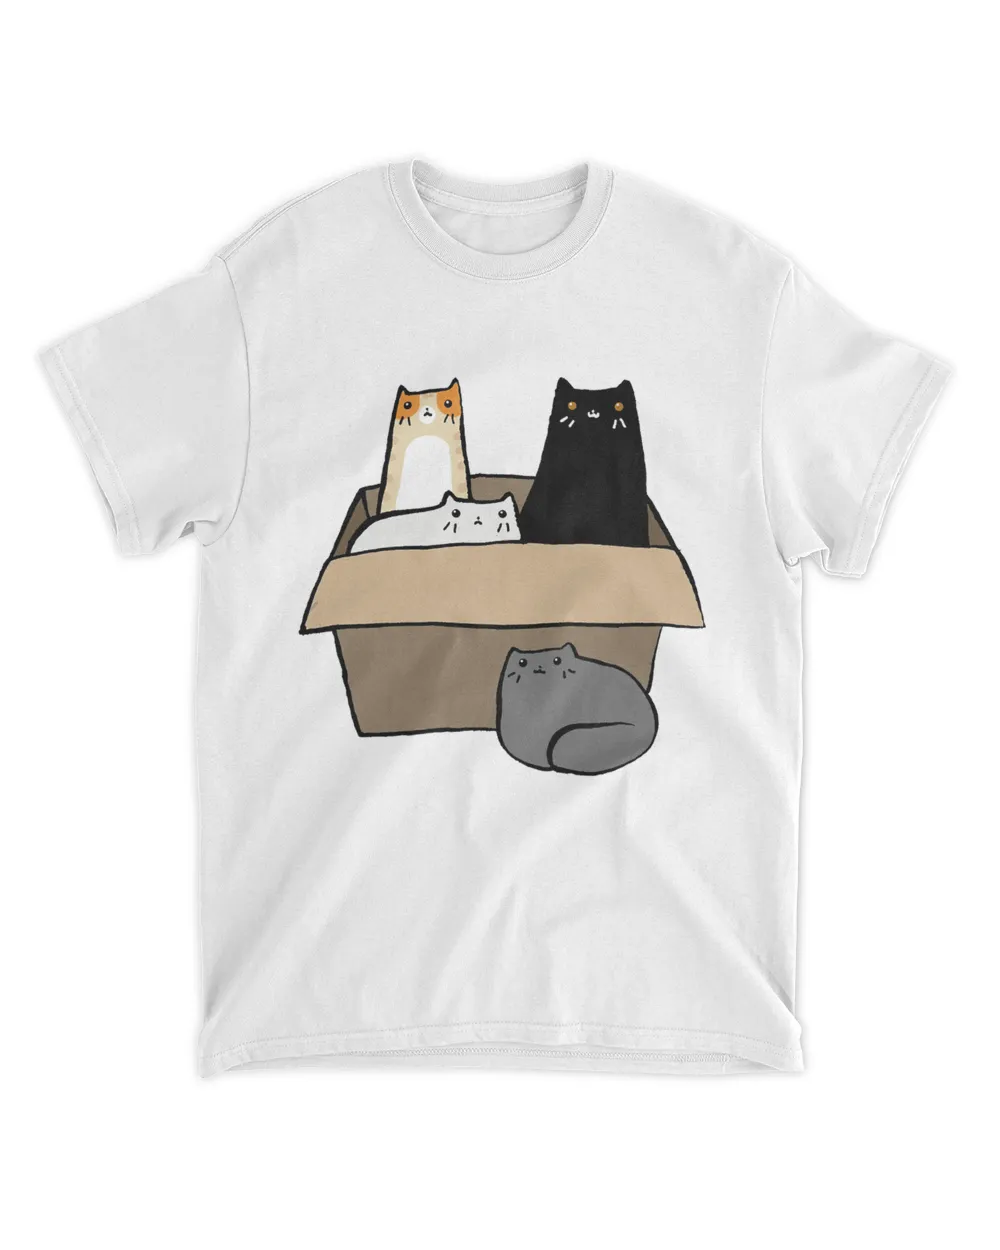 Cats in a Box Shirt